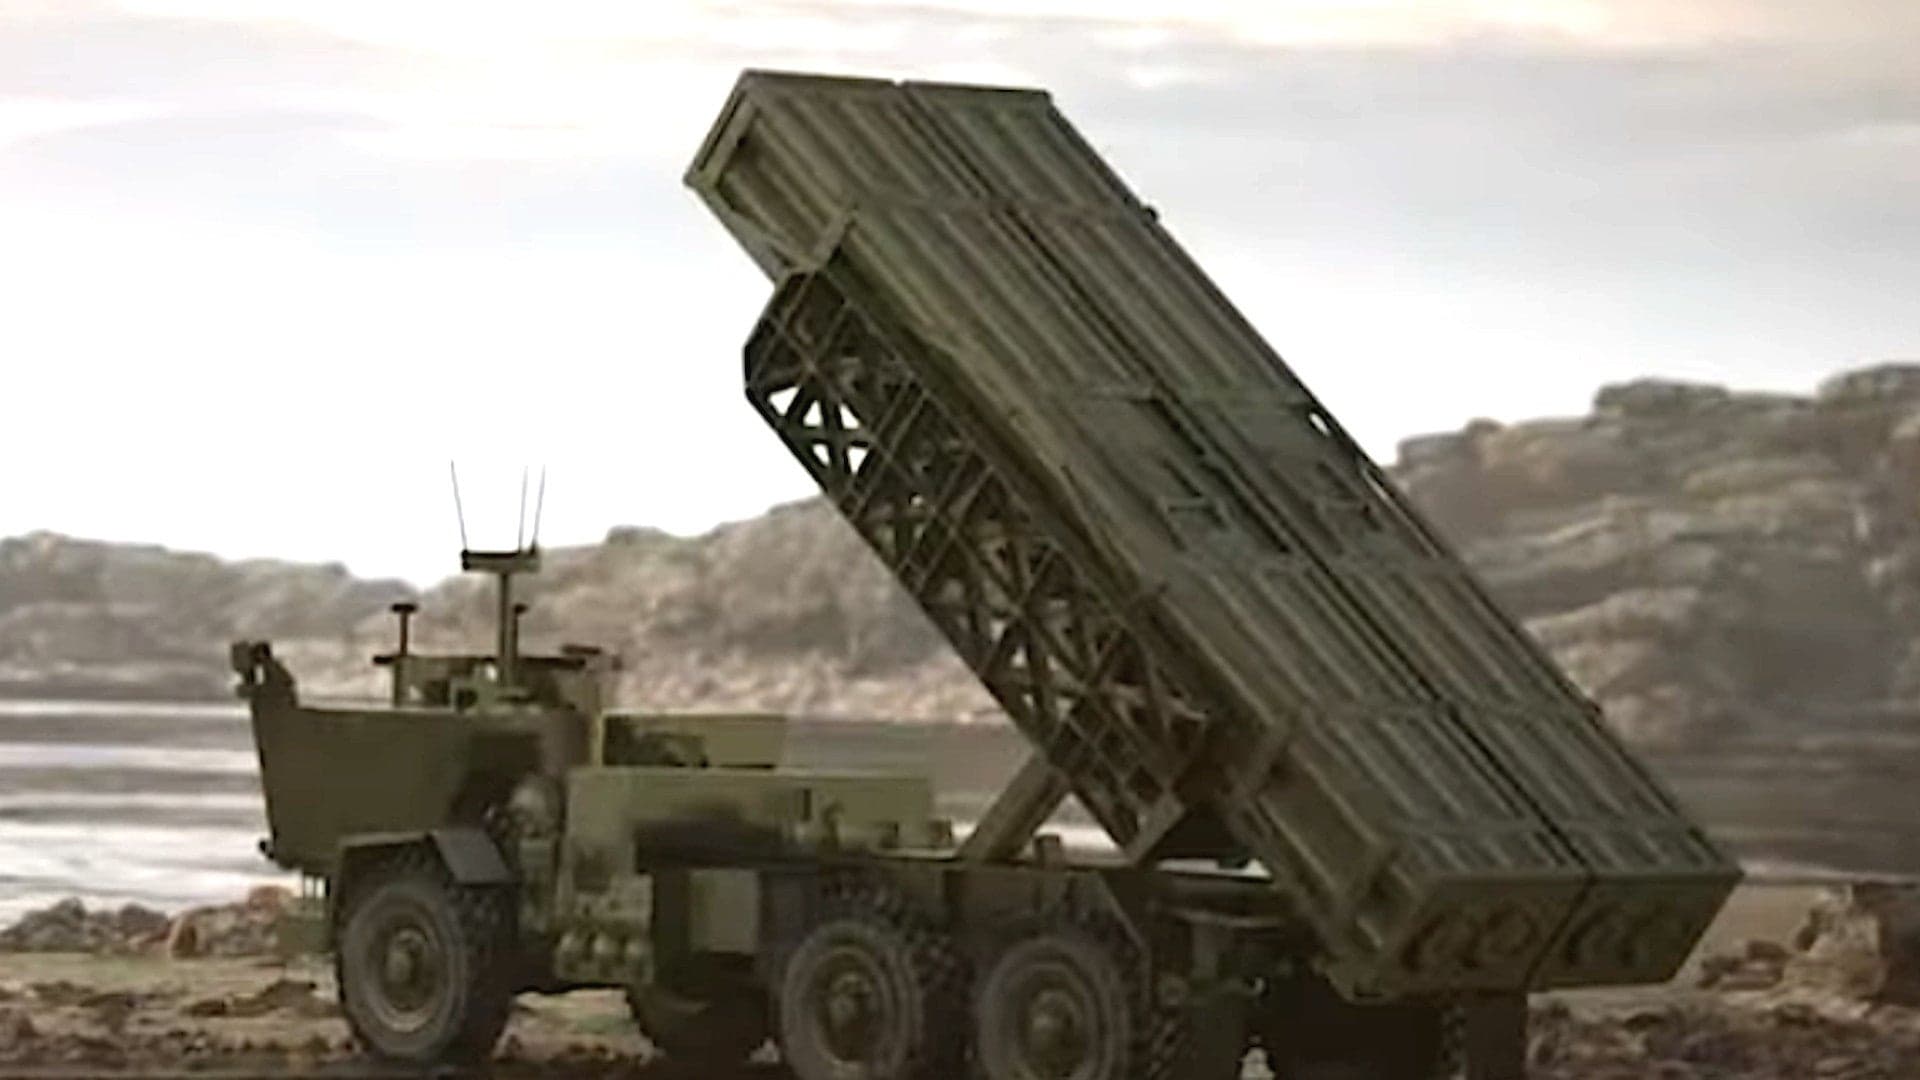 Army’s New Unmanned Missile Launcher Could Target Ships And Air Defenses